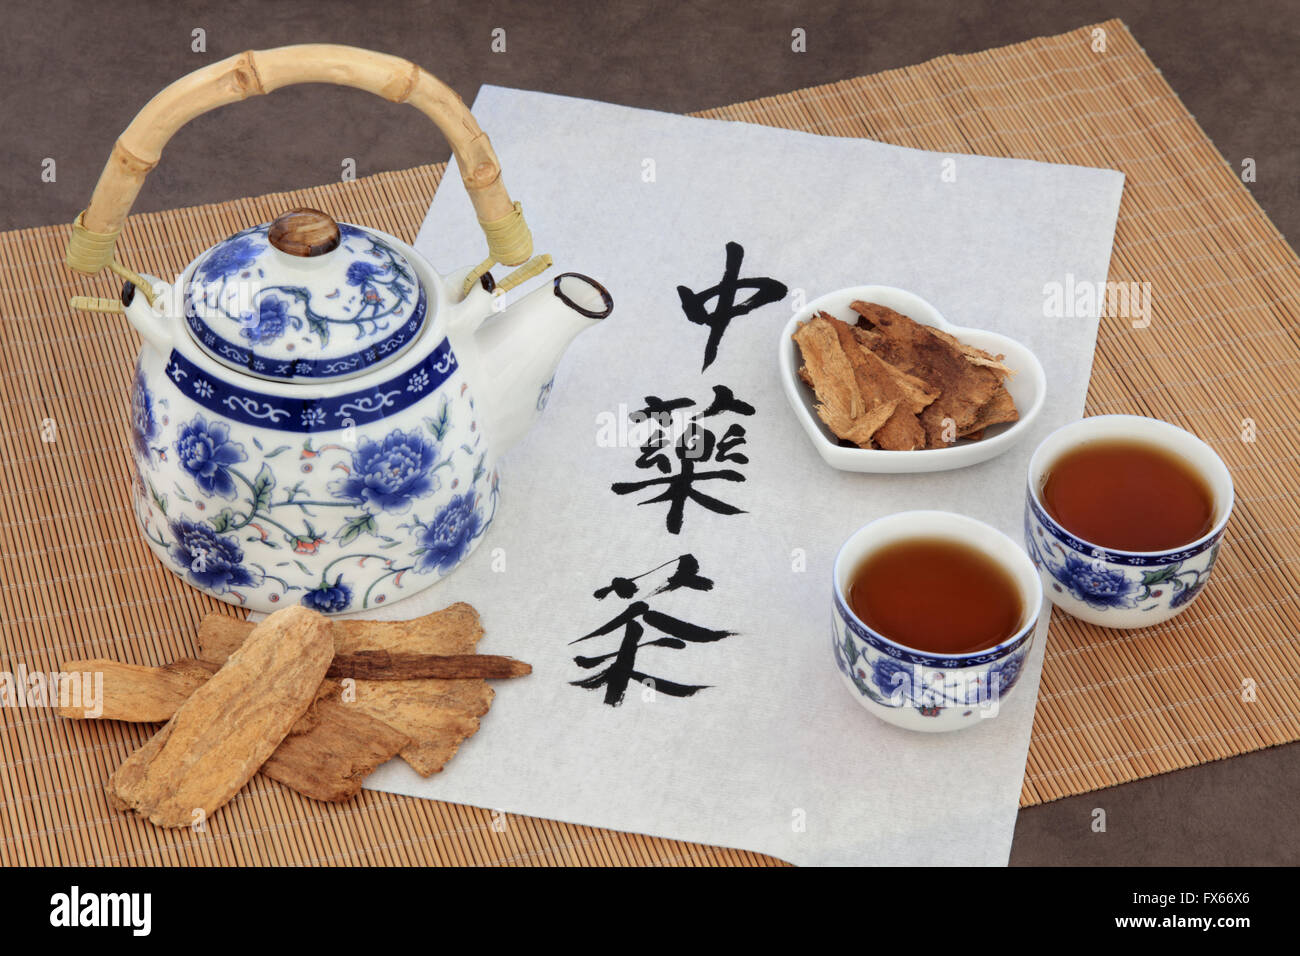 Astragalus herb tea also used in chinese herbal medicine, with cups and calligraphy script on rice paper over bamboo. Stock Photo